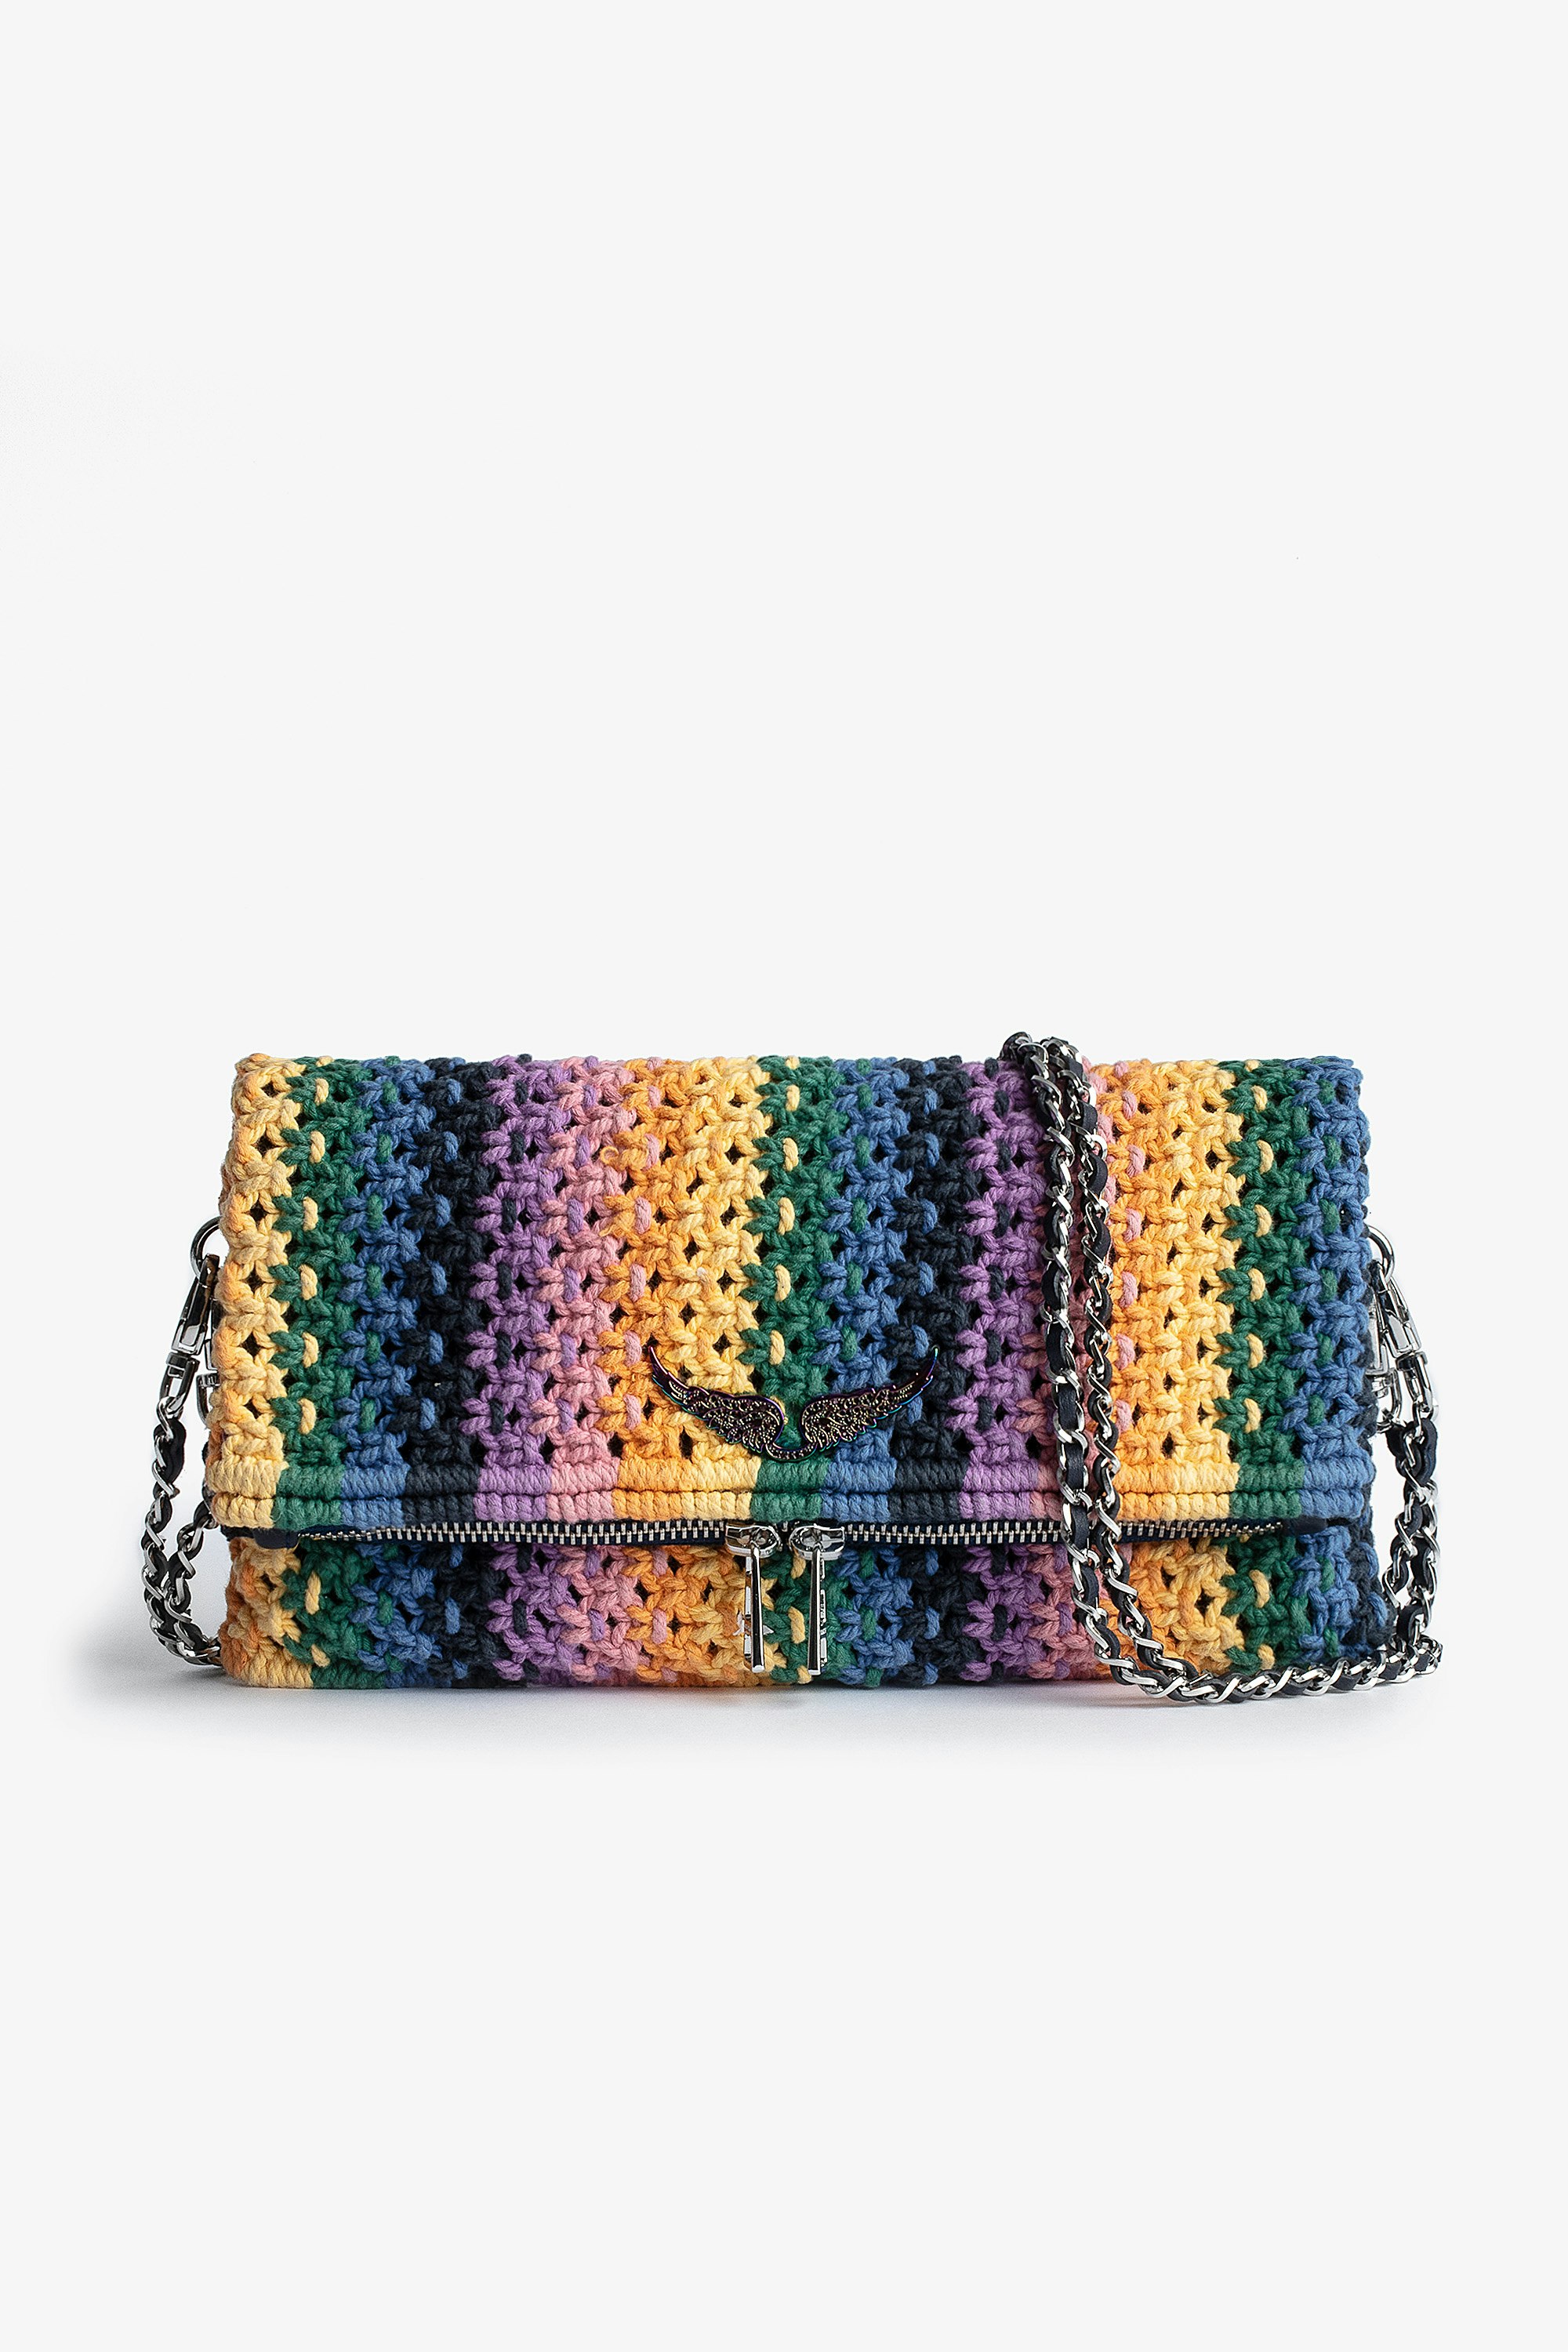 Rock Macramé Clutch Women’s multicolour cotton macramé clutch with double leather-and-metal chain featuring crystal-studded wings